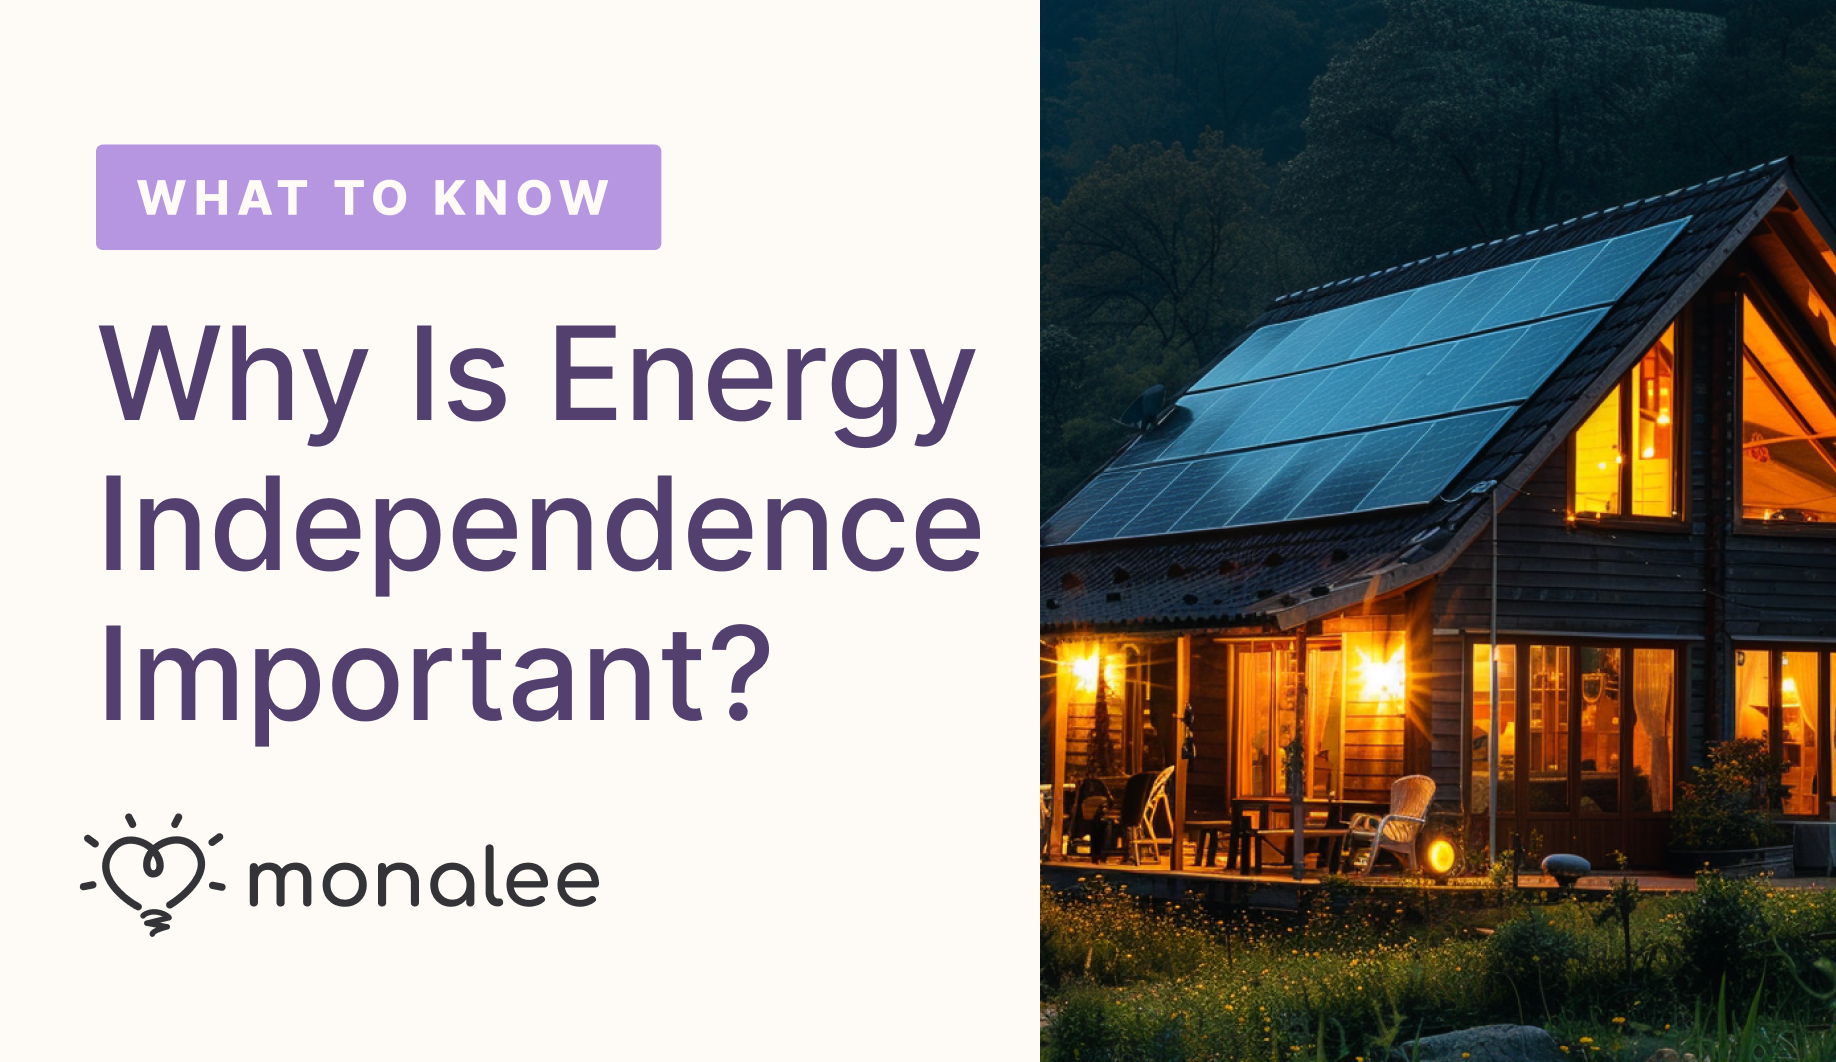 Why Is Energy Independence Important?